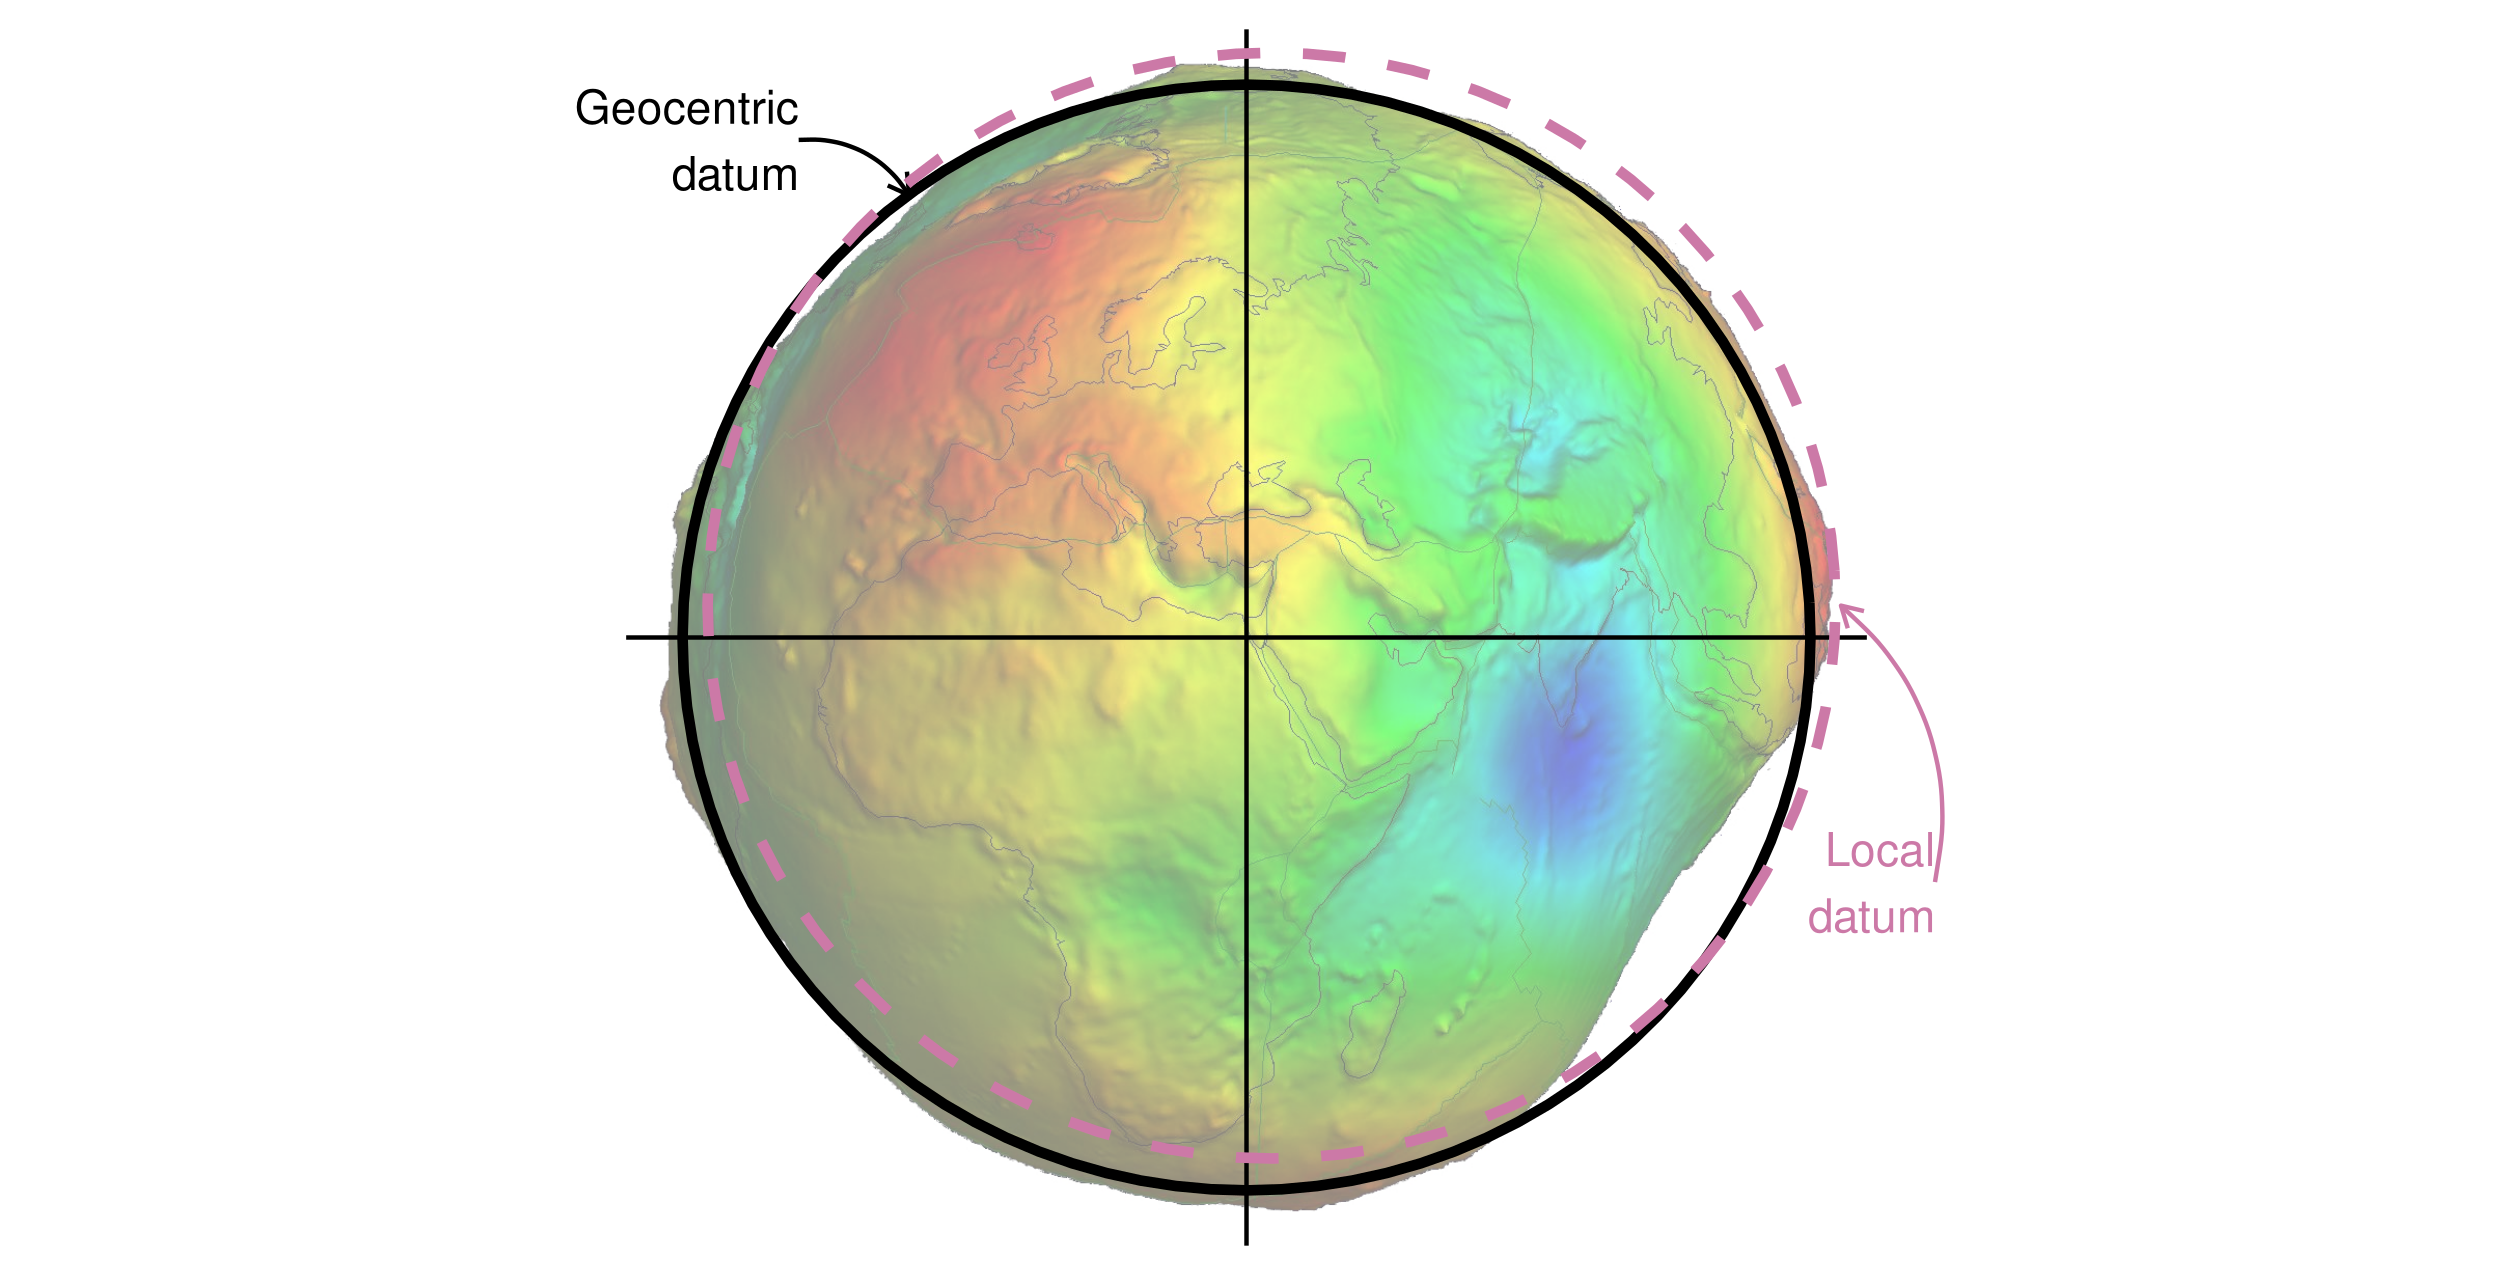 Geocentric and local geodetic datums shown on top of a geoid (in false color and the vertical exaggeration by 10,000 scale factor). Image of the geoid is adapted from the work of Ince et al. (2019).